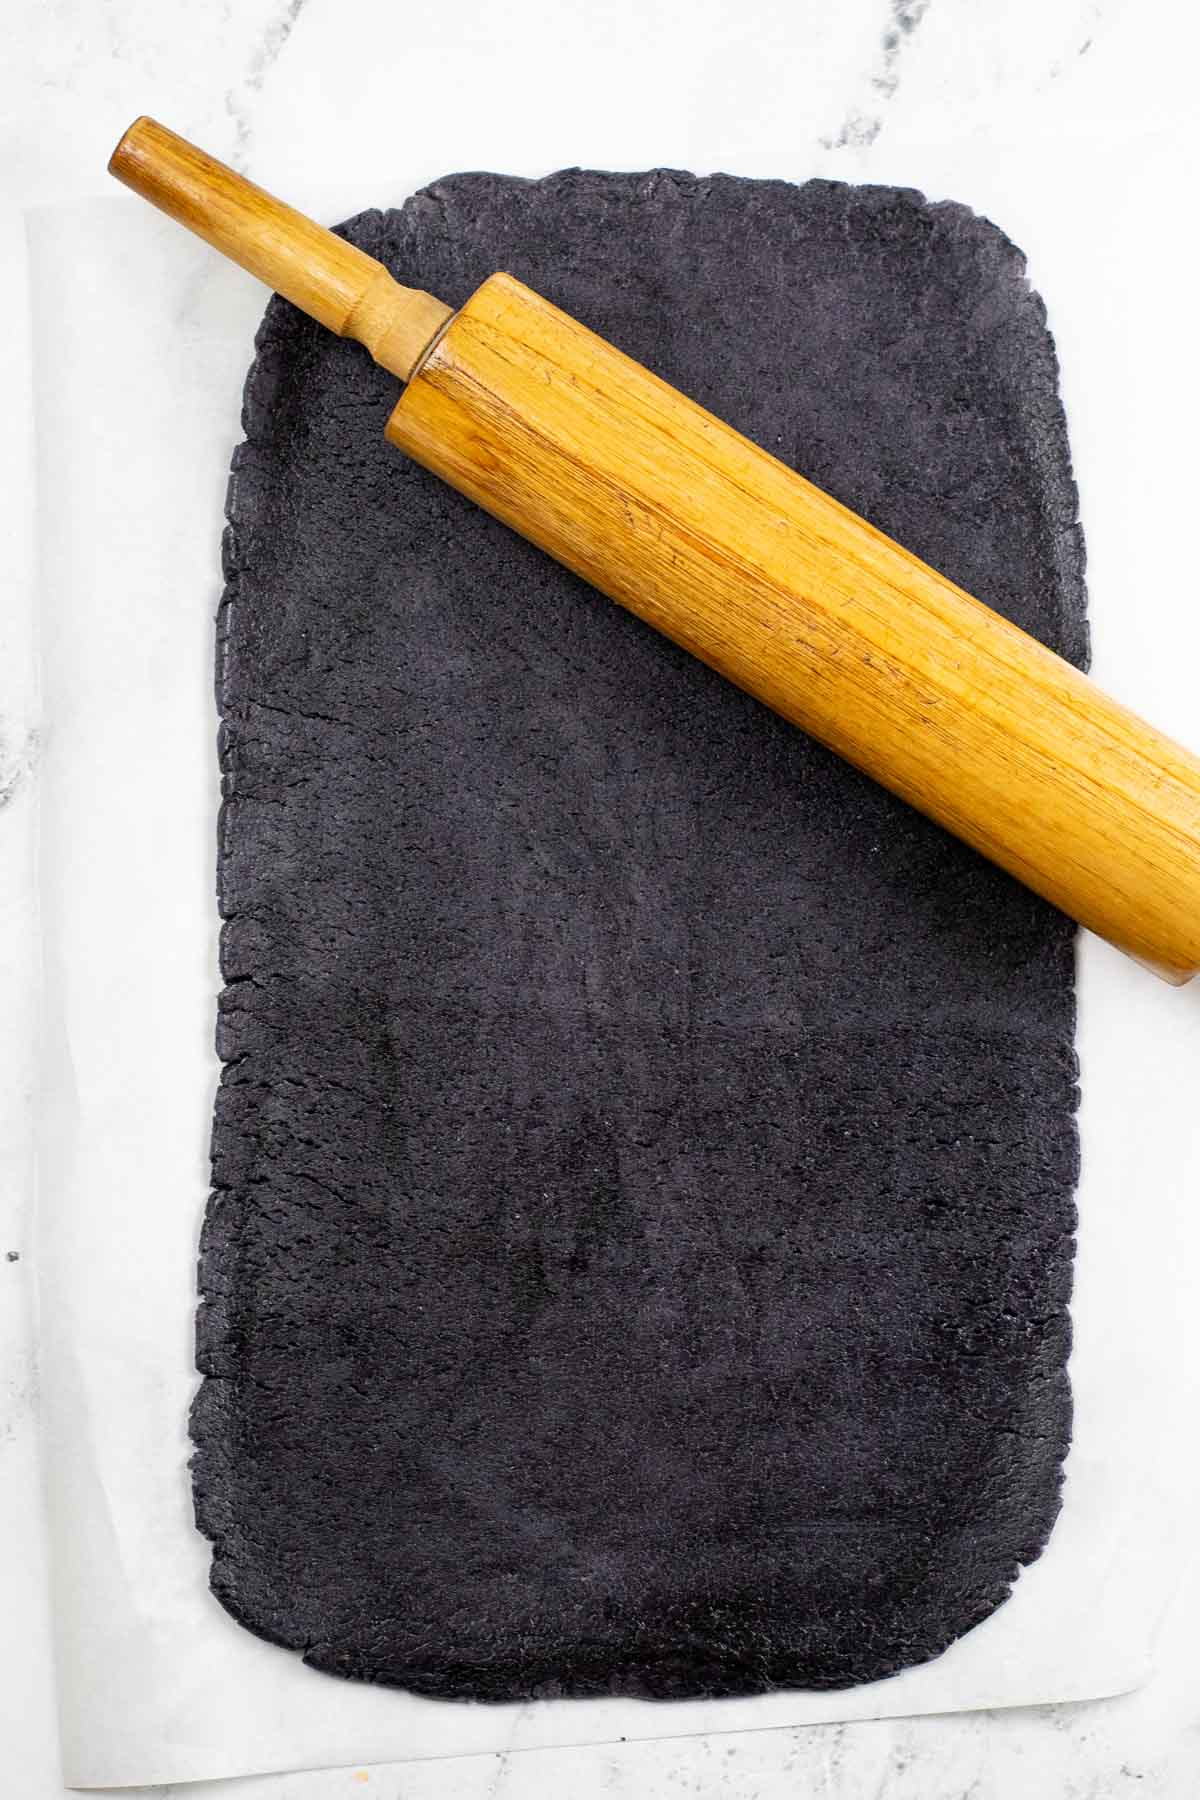 black cookie dough rolled out on a pice of parchment paper with a wooden rolling pin.